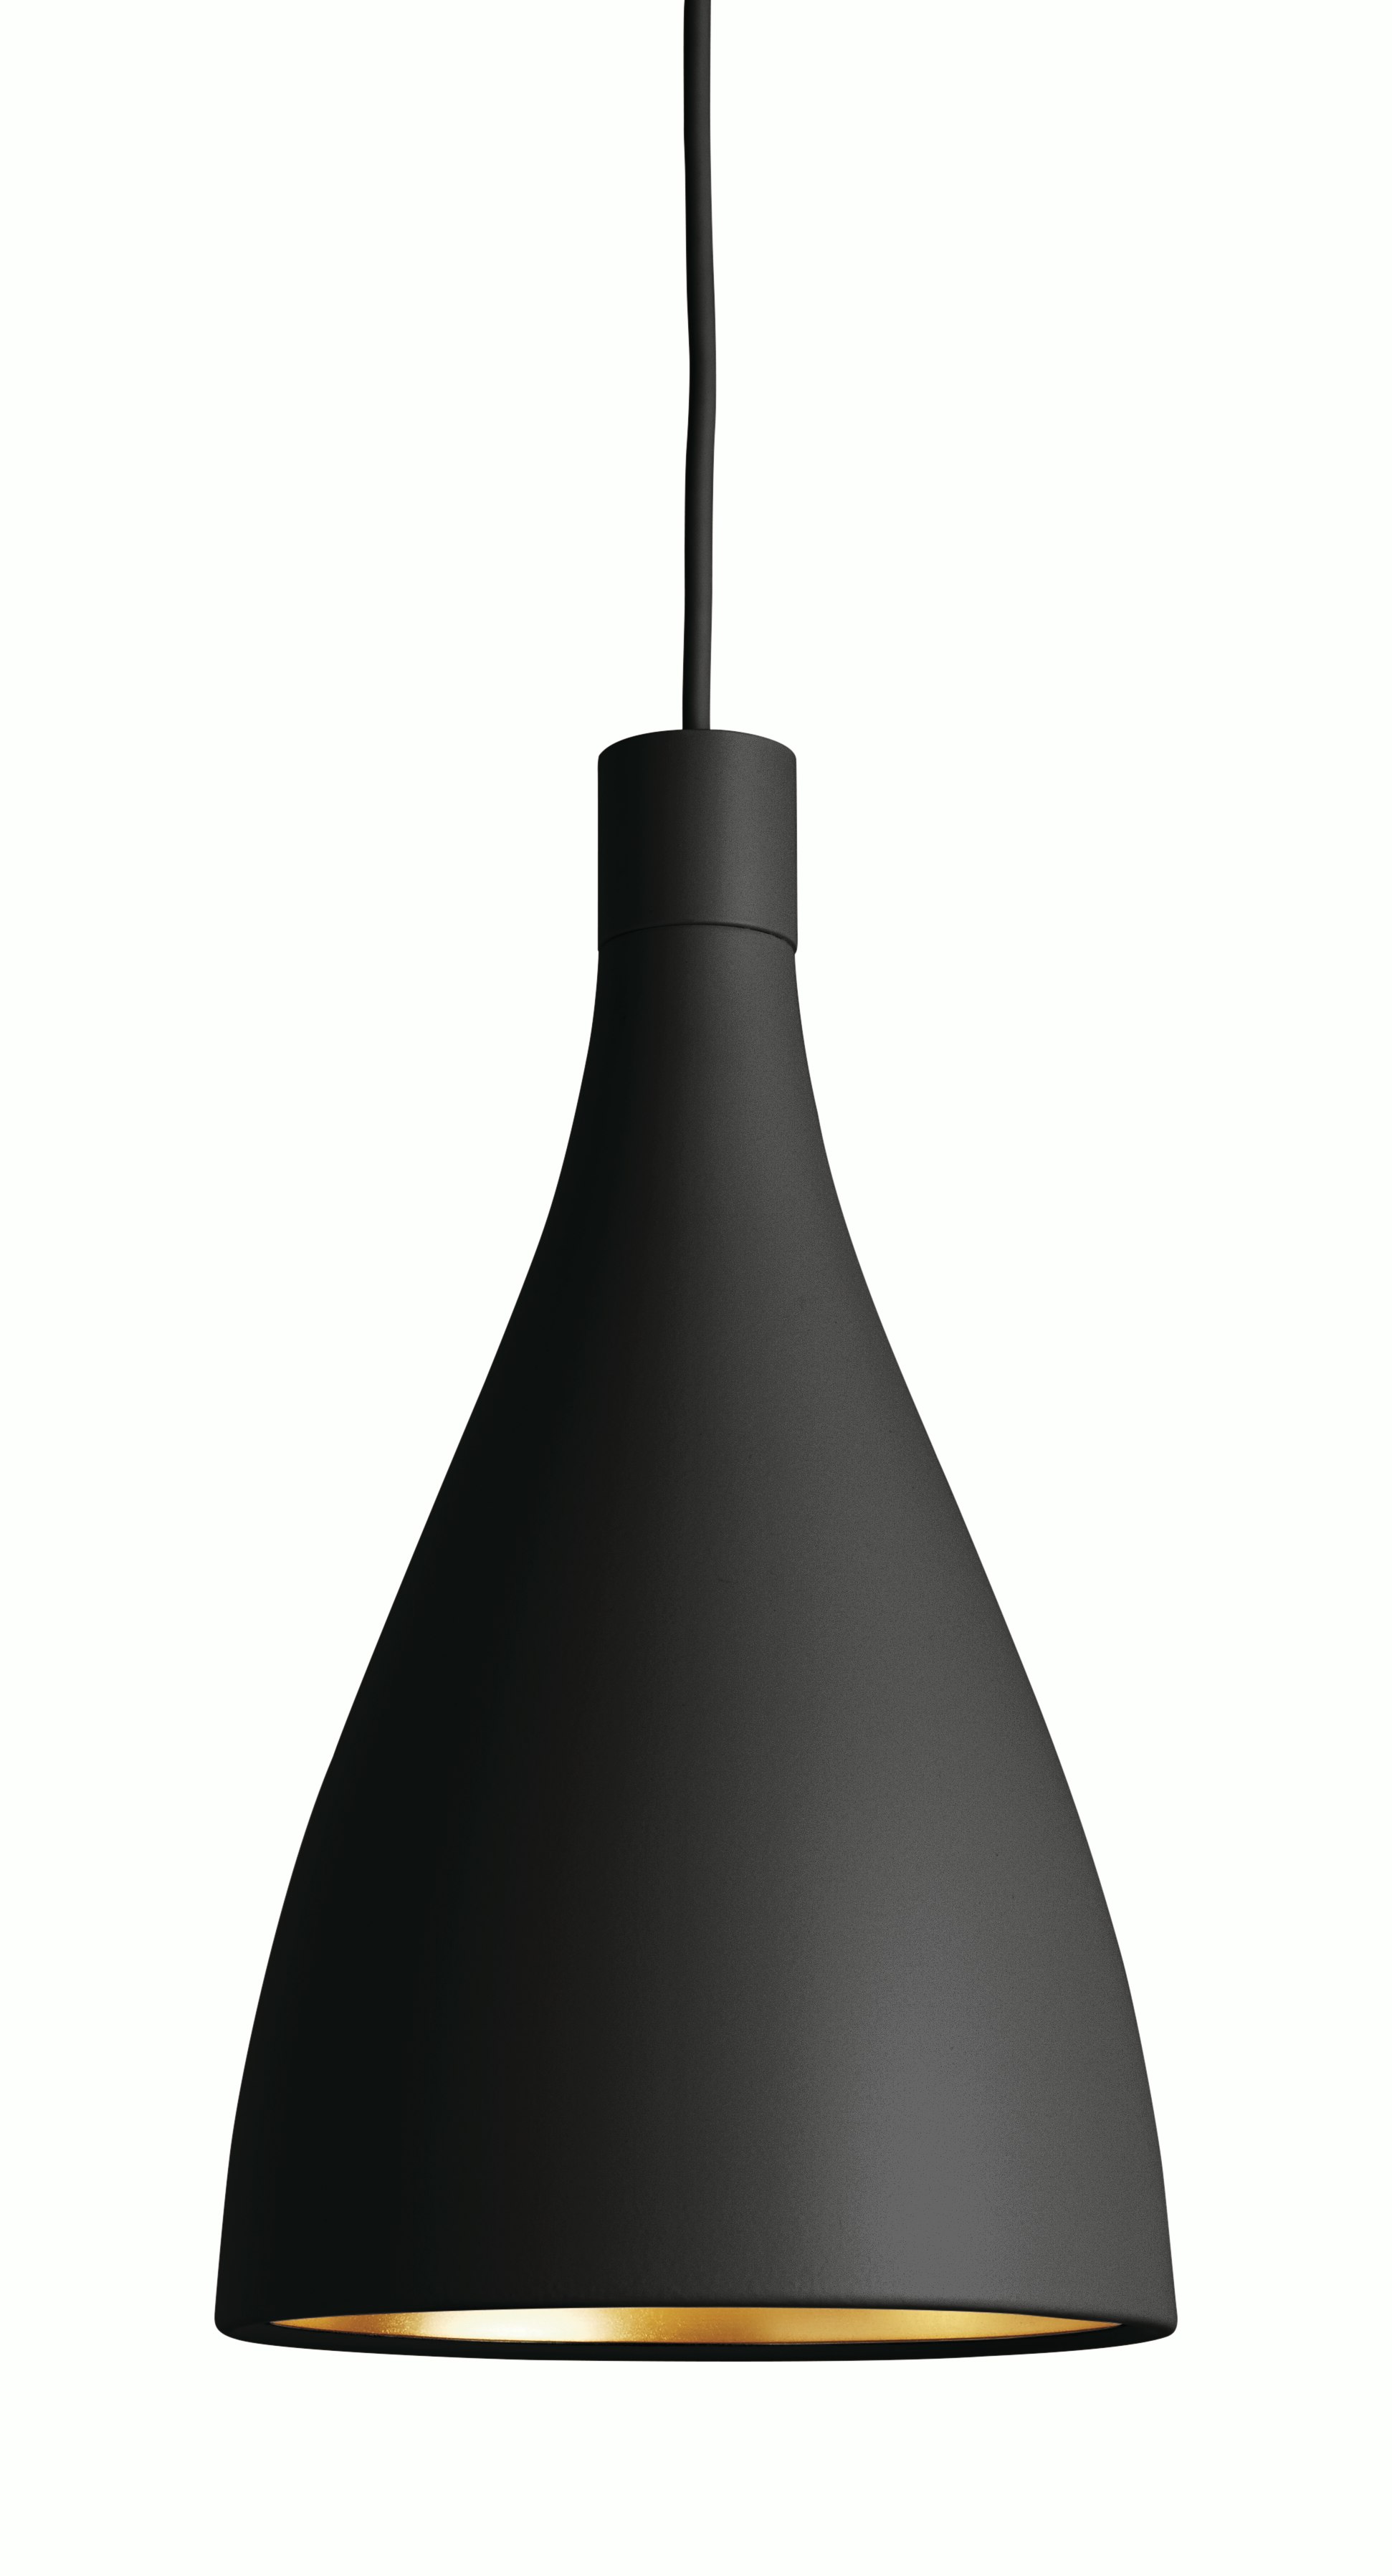 Details about   Herringbone Design Pendant Ceiling Shade Black & Grey Contemporary LED Multipack 